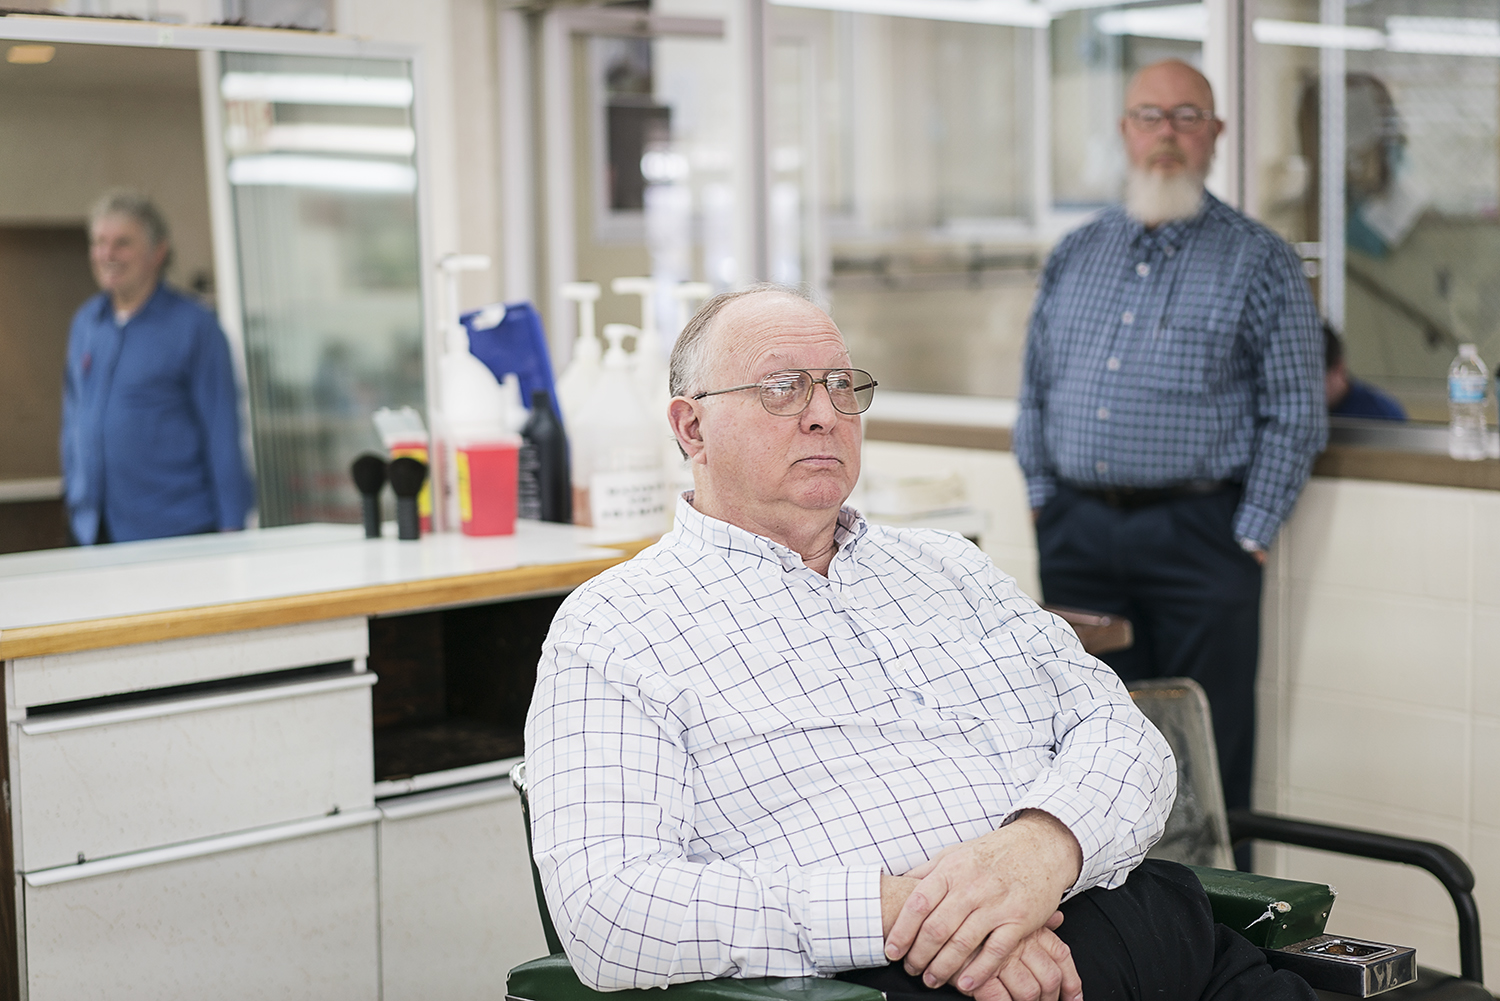 Flint, MI - Tuesday, February 6, 2018: Linden resident Larry Woodby, 70, an instructor at the Flint Institute of Barbering, sits in an empty chair flanked by the reflection of Bob Morey, 68, from Linden, Director of Education (left) and Ted Taylor, 6